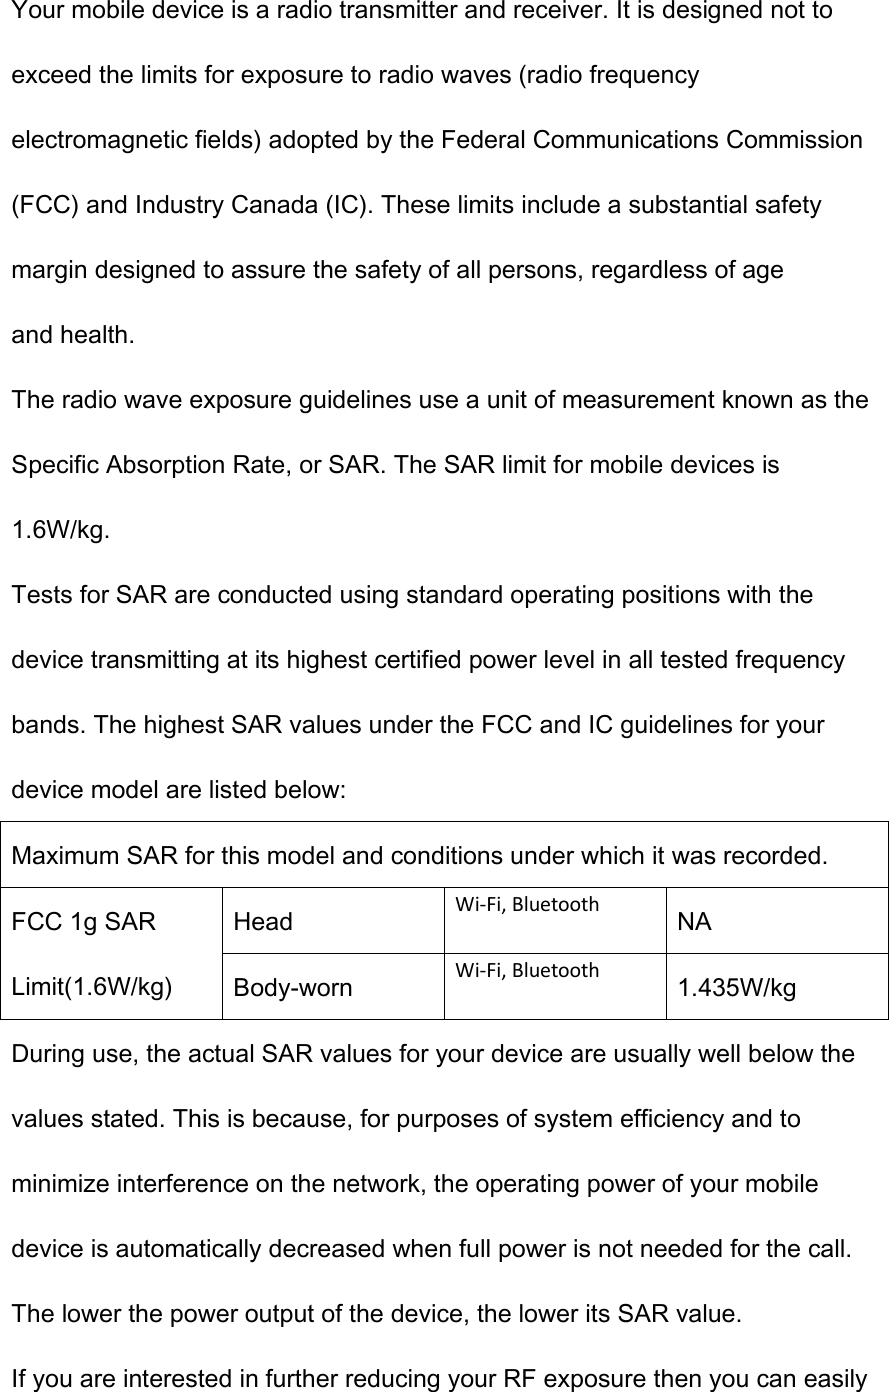 Your mobile device is a radio transmitter and receiver. It is designed not to exceed the limits for exposure to radio waves (radio frequency electromagnetic fields) adopted by the Federal Communications Commission (FCC) and Industry Canada (IC). These limits include a substantial safety margin designed to assure the safety of all persons, regardless of age and health. The radio wave exposure guidelines use a unit of measurement known as the Specific Absorption Rate, or SAR. The SAR limit for mobile devices is 1.6W/kg. Tests for SAR are conducted using standard operating positions with the device transmitting at its highest certified power level in all tested frequency bands. The highest SAR values under the FCC and IC guidelines for your device model are listed below: Maximum SAR for this model and conditions under which it was recorded. FCC 1g SAR Limit(1.6W/kg) Head  Wi-Fi, Bluetooth NA Body-worn  Wi-Fi, Bluetooth 1.435W/kg During use, the actual SAR values for your device are usually well below the values stated. This is because, for purposes of system efficiency and to minimize interference on the network, the operating power of your mobile device is automatically decreased when full power is not needed for the call. The lower the power output of the device, the lower its SAR value. If you are interested in further reducing your RF exposure then you can easily 